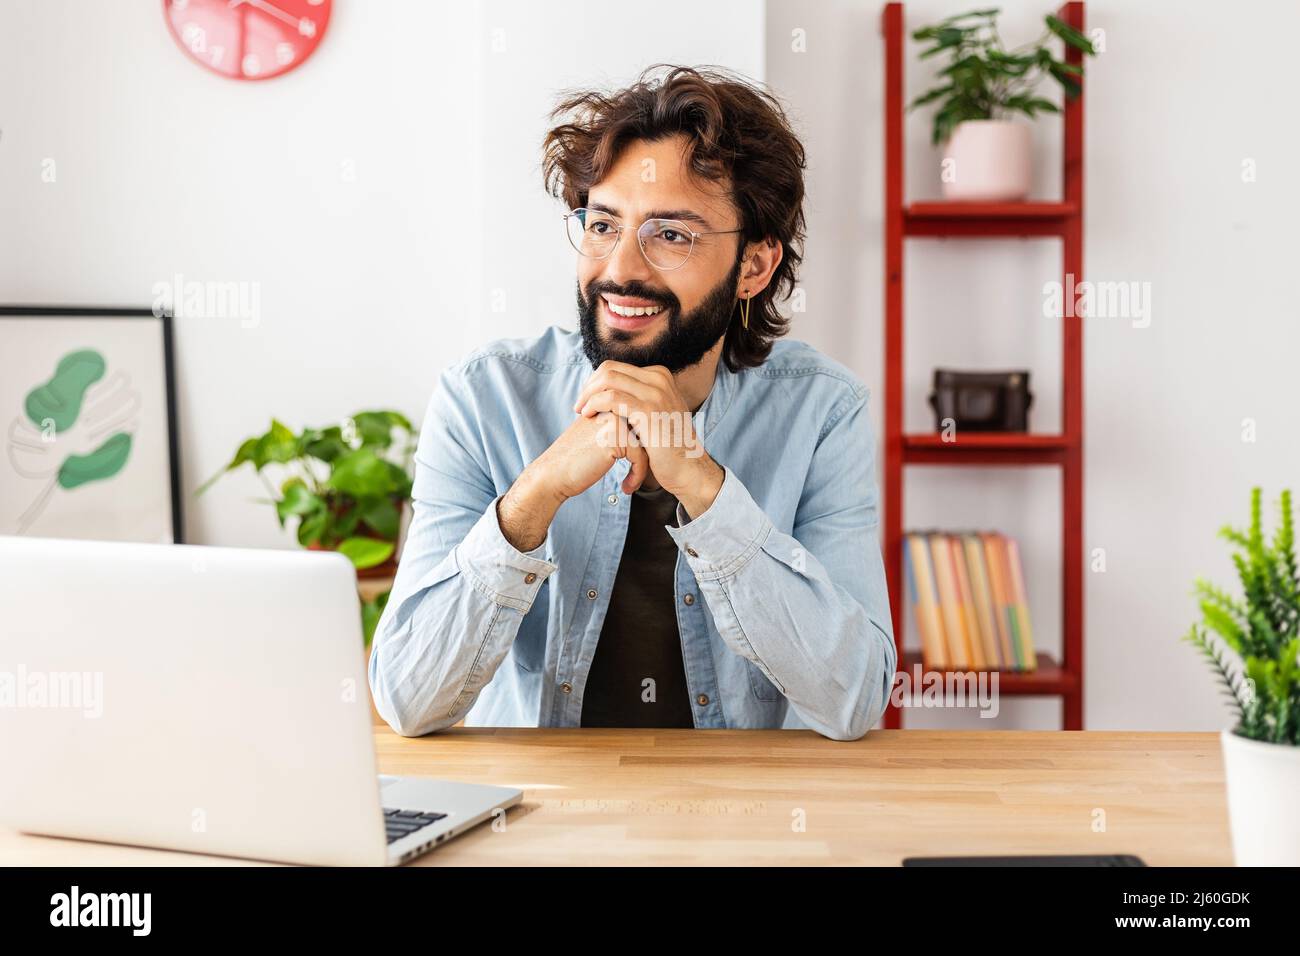 Smiling businessman looking away daydreaming while on a break from work. Stock Photo